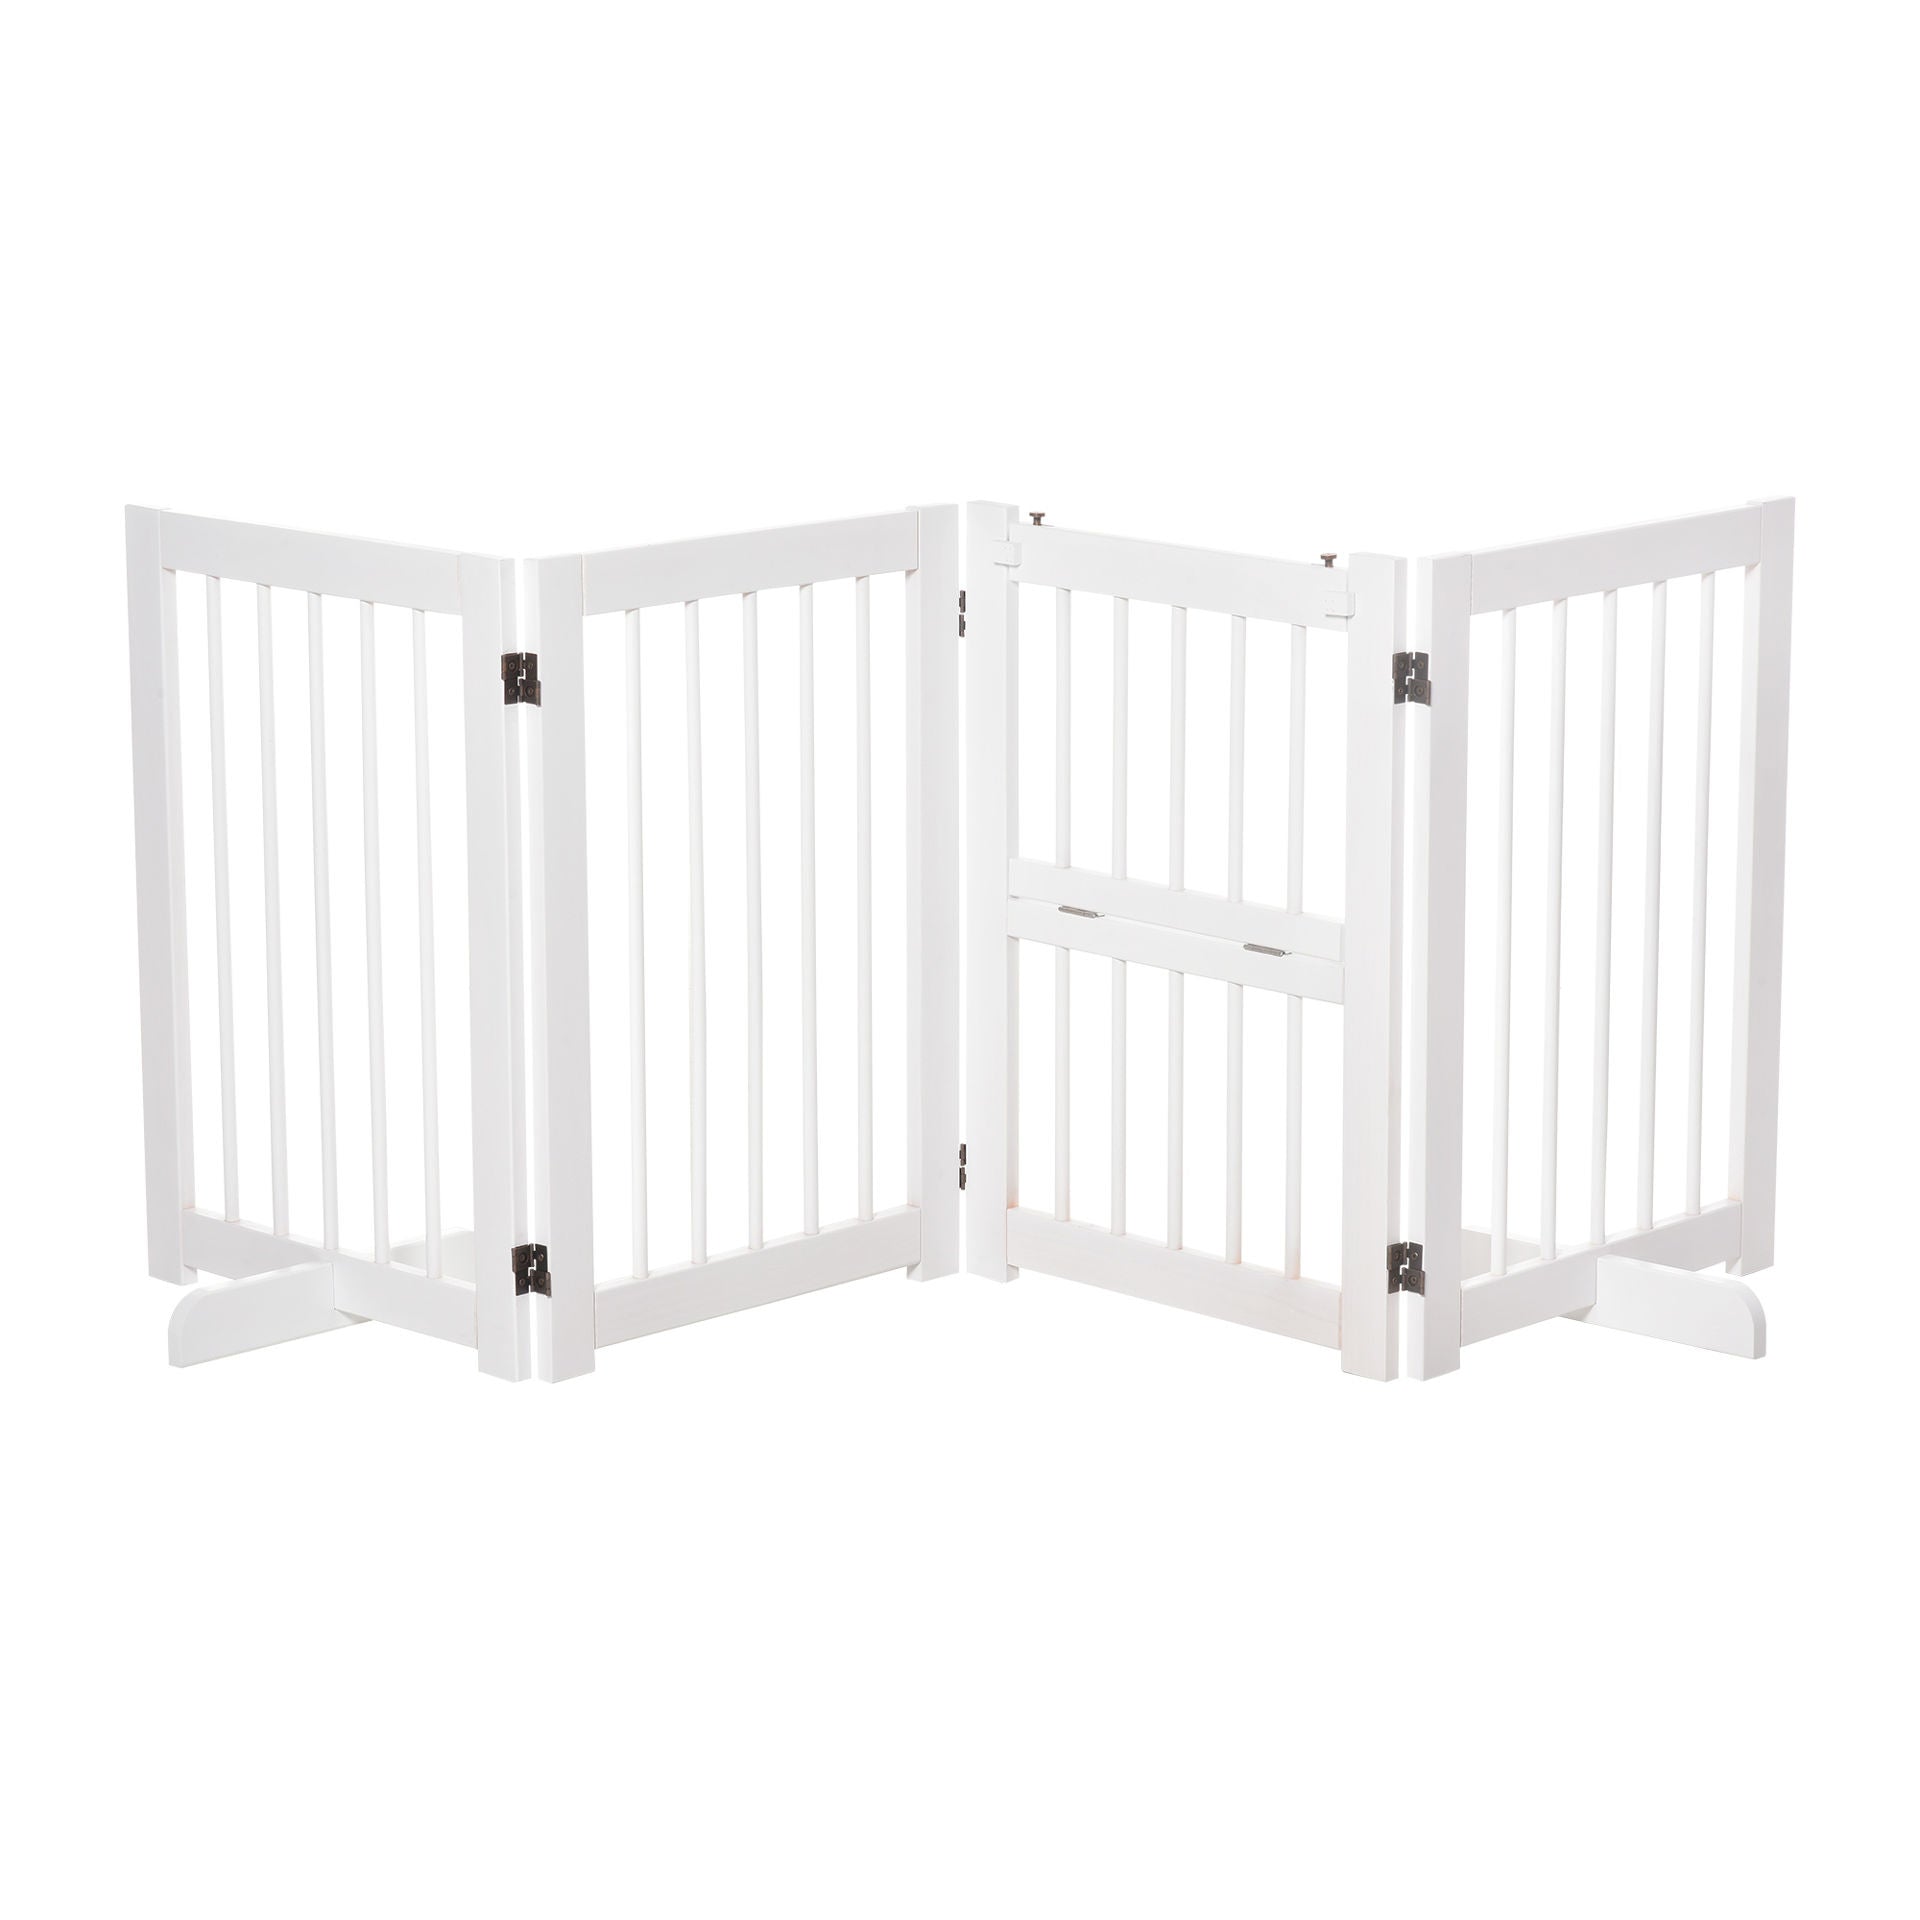 Nancy's Red Deer Safety Fence with 2 Support Legs, Foldable Safety Fence with Configuration Fence, Reversible Door